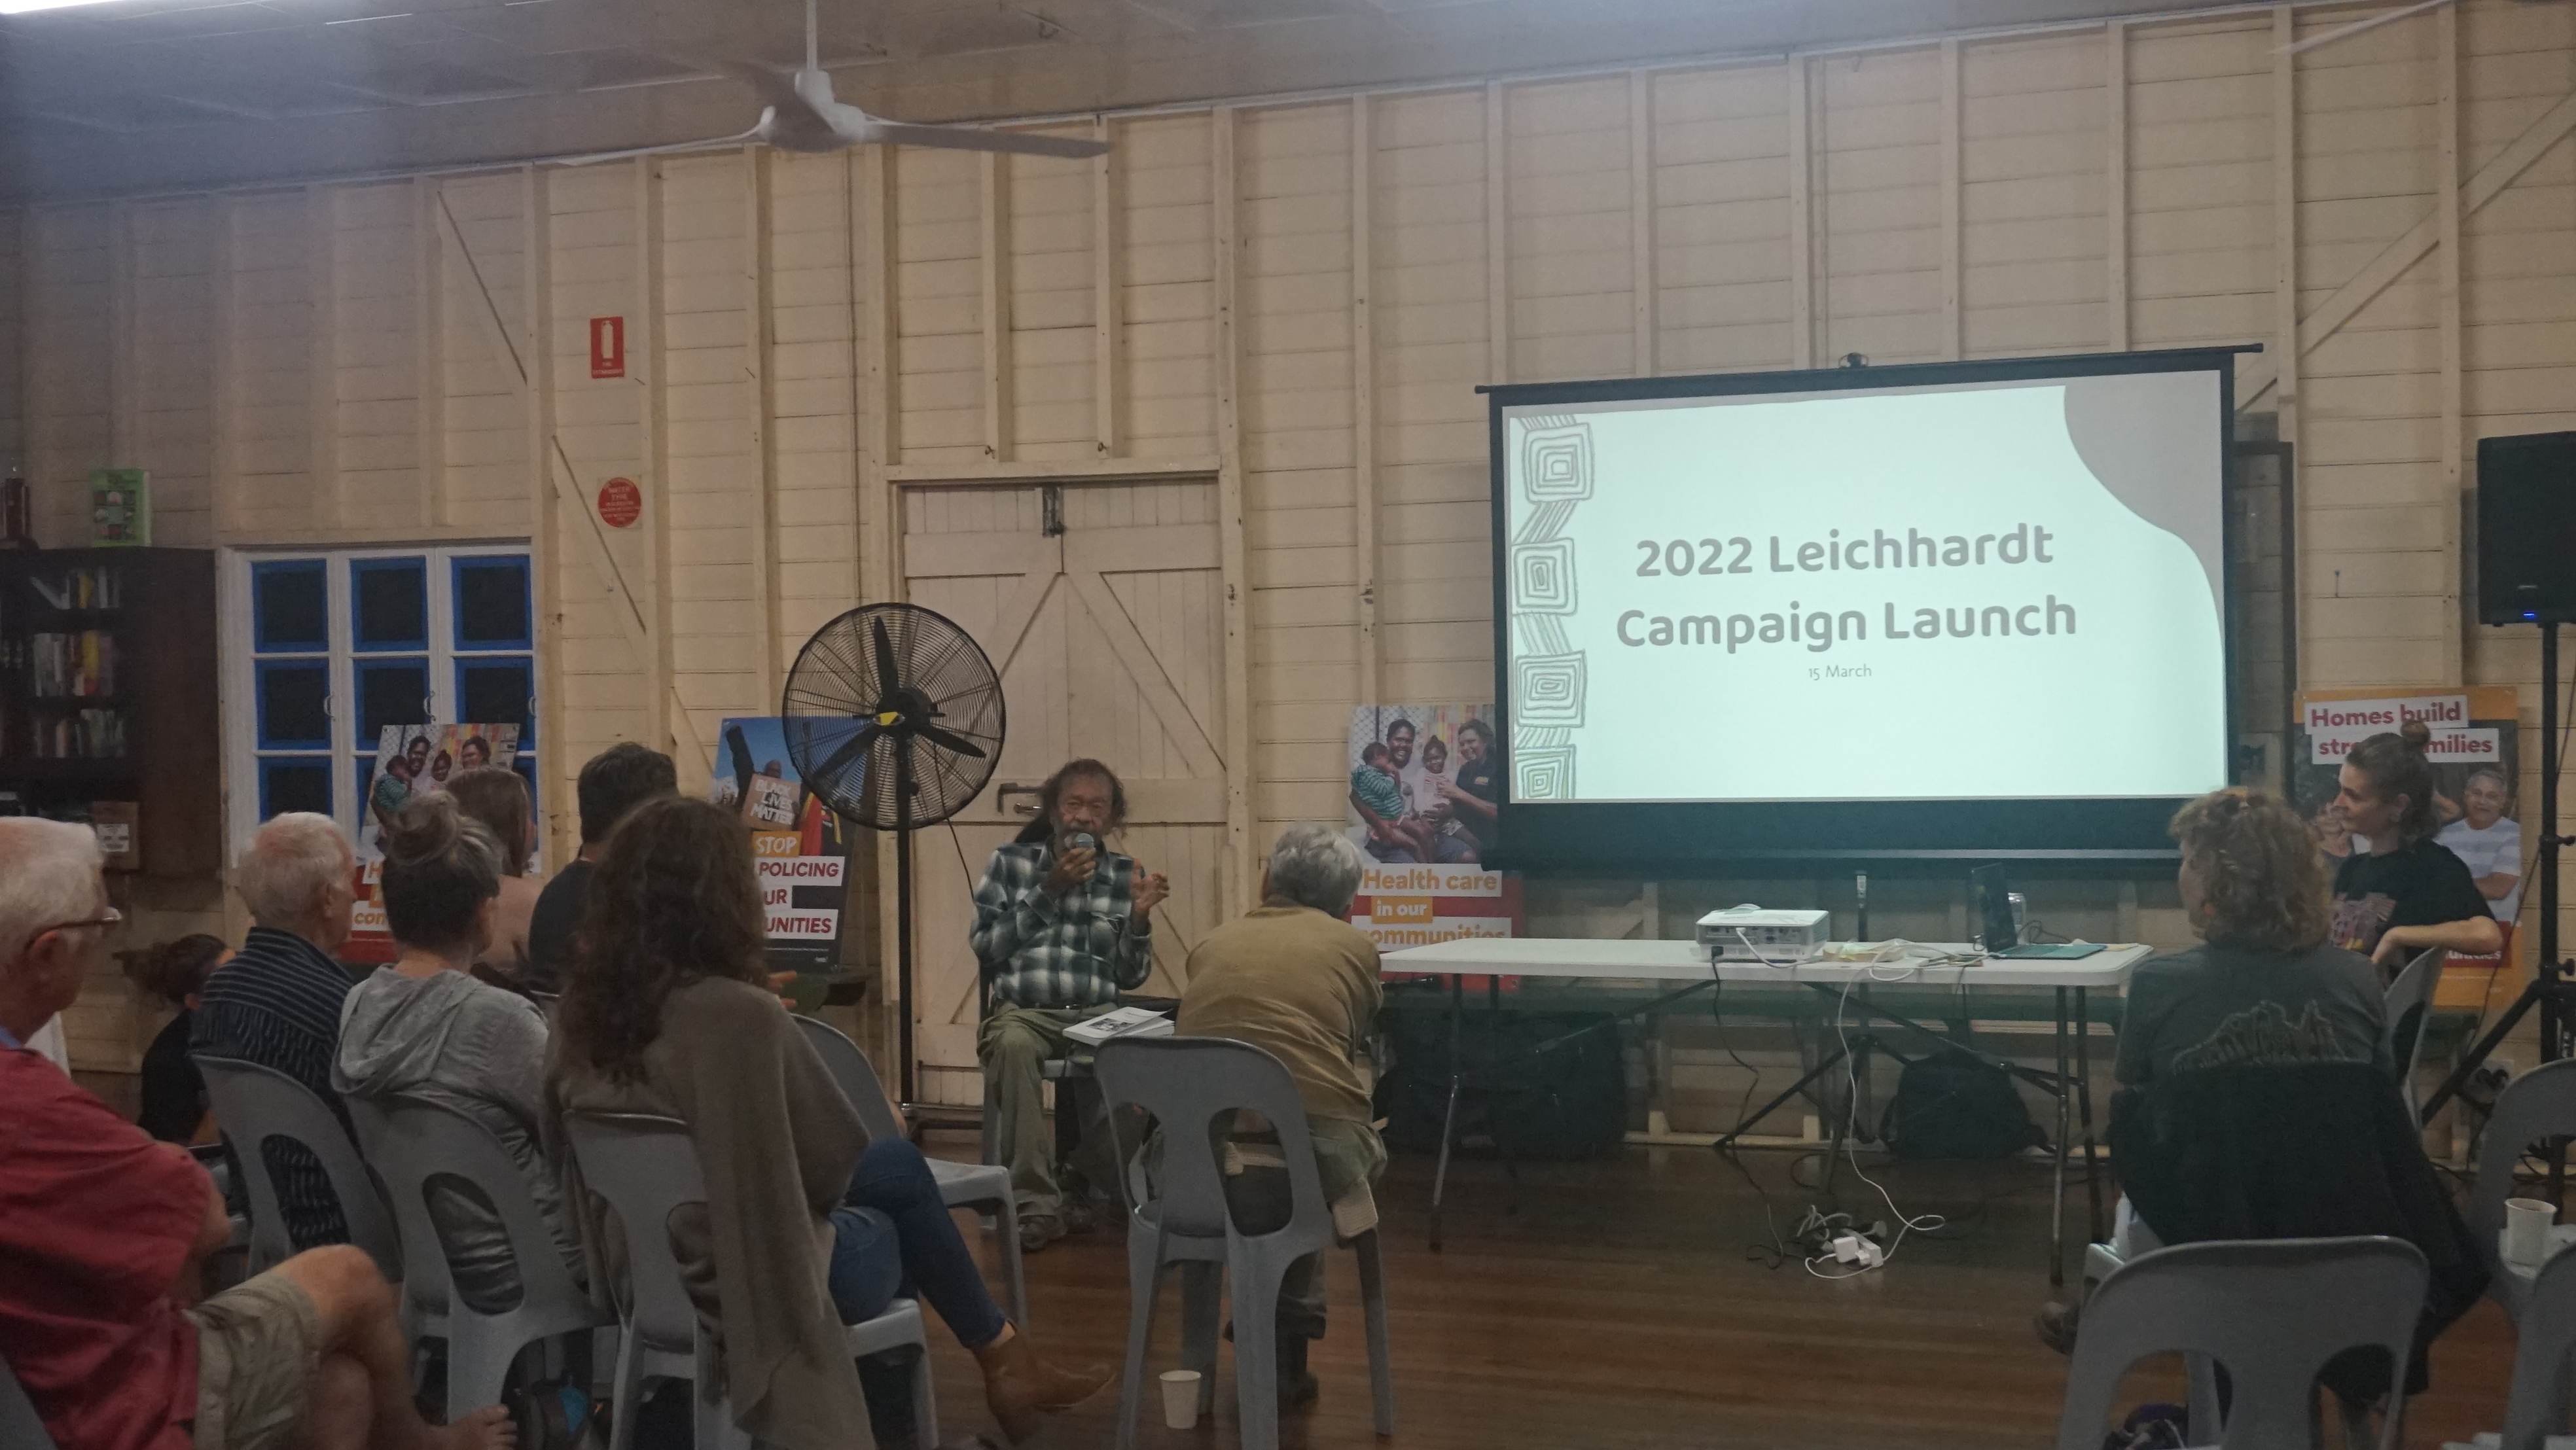 Photo of the Leichhardt Election Launch event in Cairns